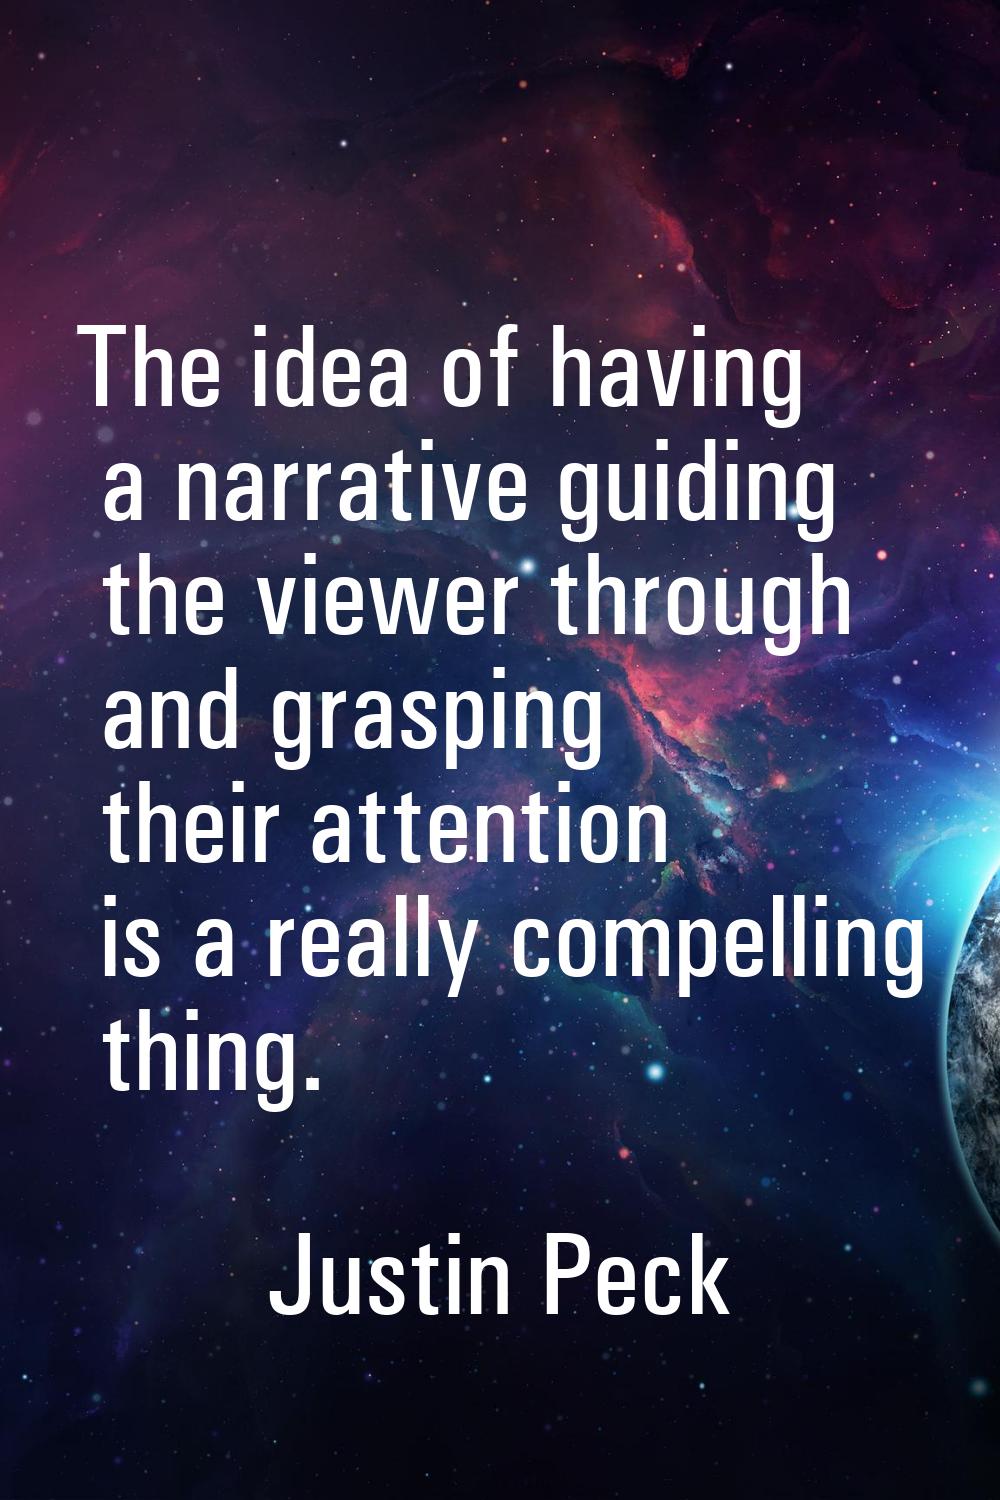 The idea of having a narrative guiding the viewer through and grasping their attention is a really 